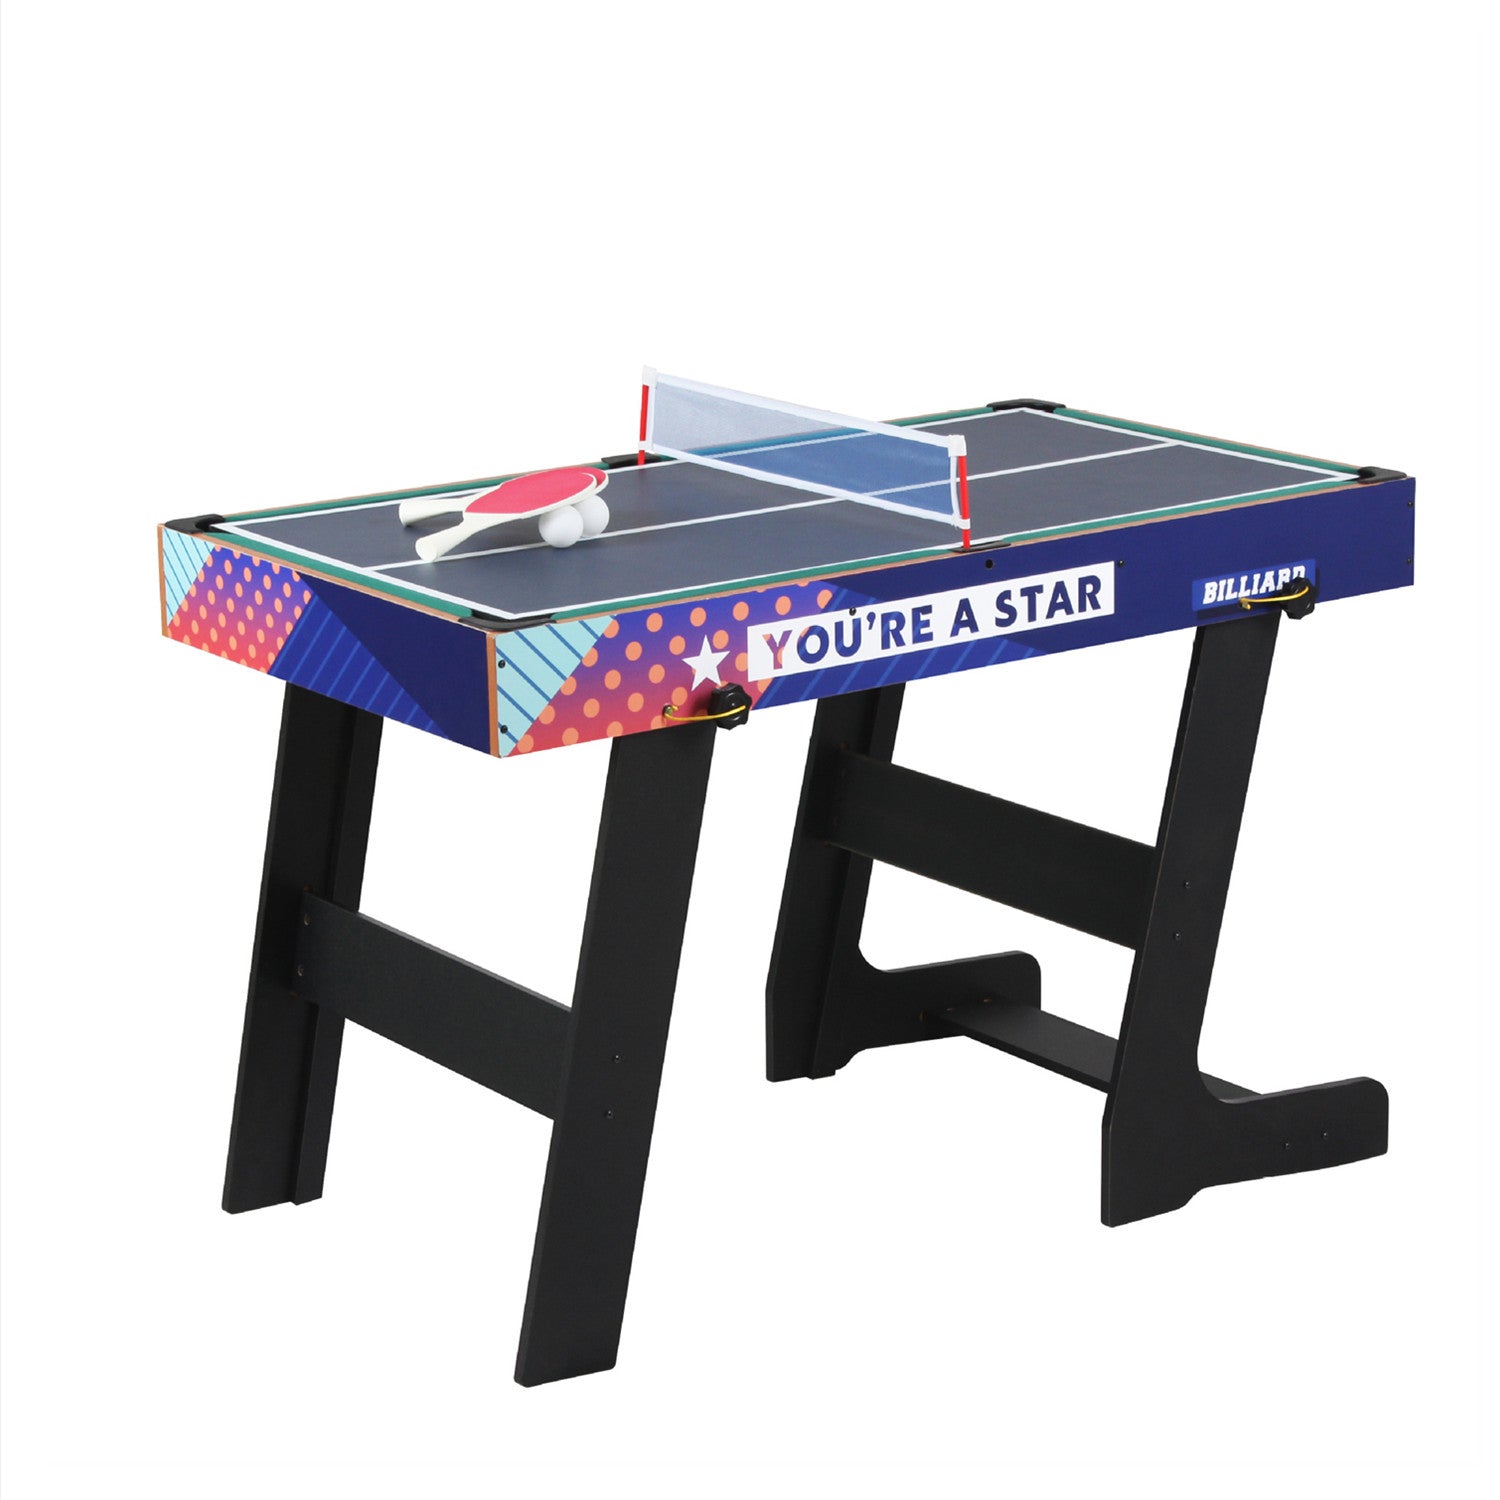 4FT 4IN1 Foldable Multi Games Table | Premium Quality